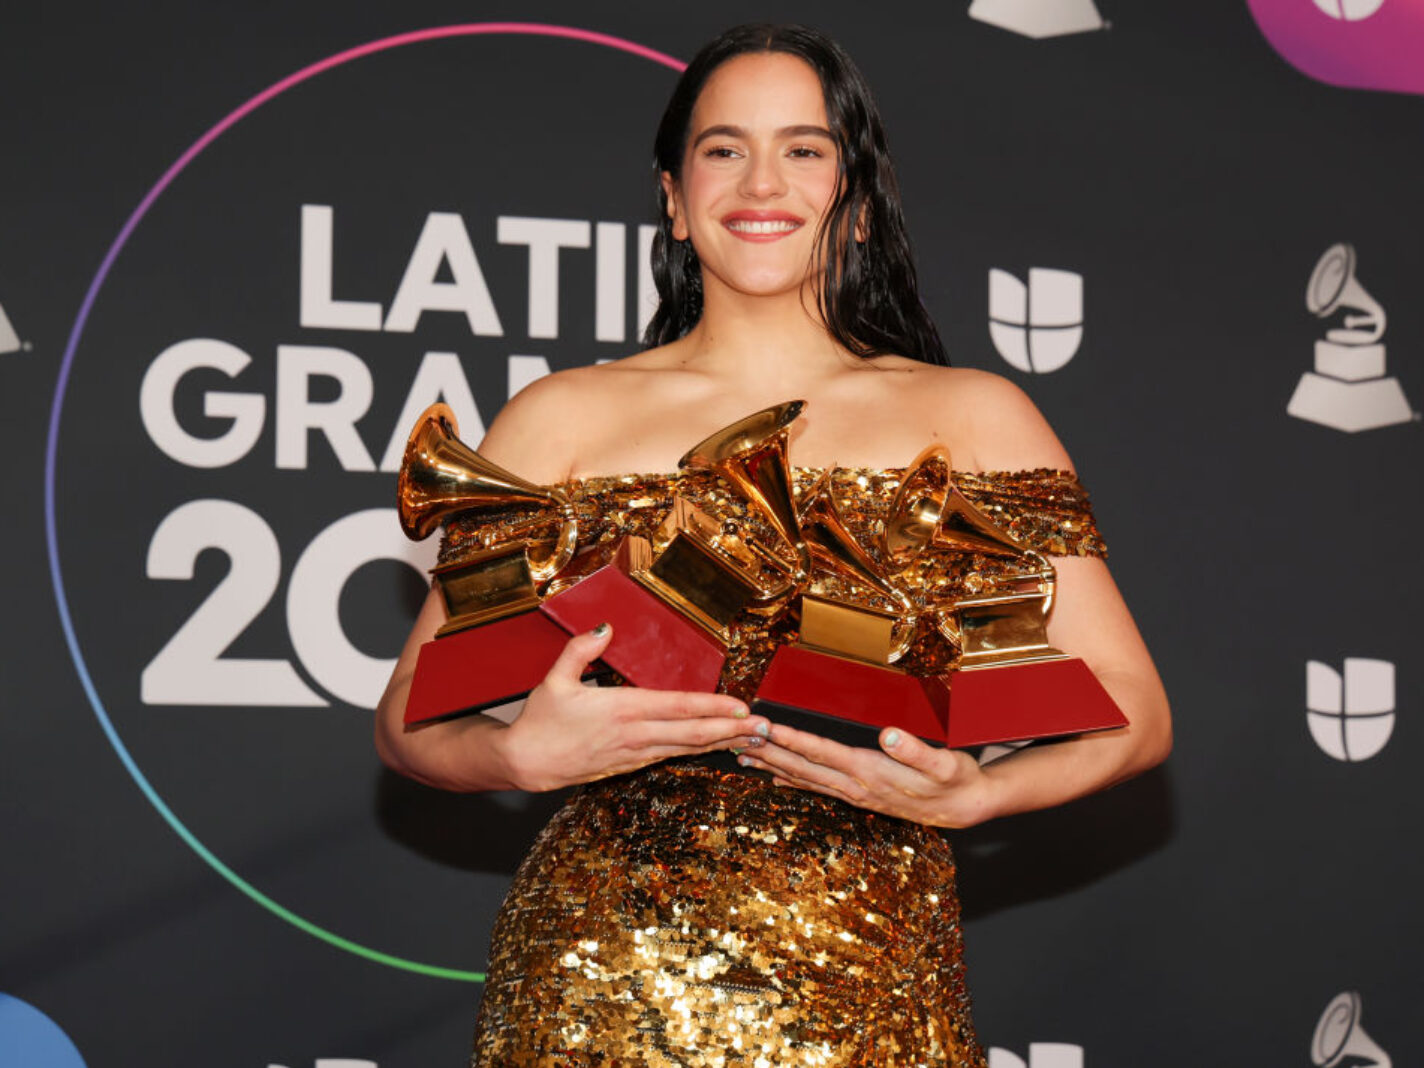 The Latin Grammys Confirm New Spain Location & Date